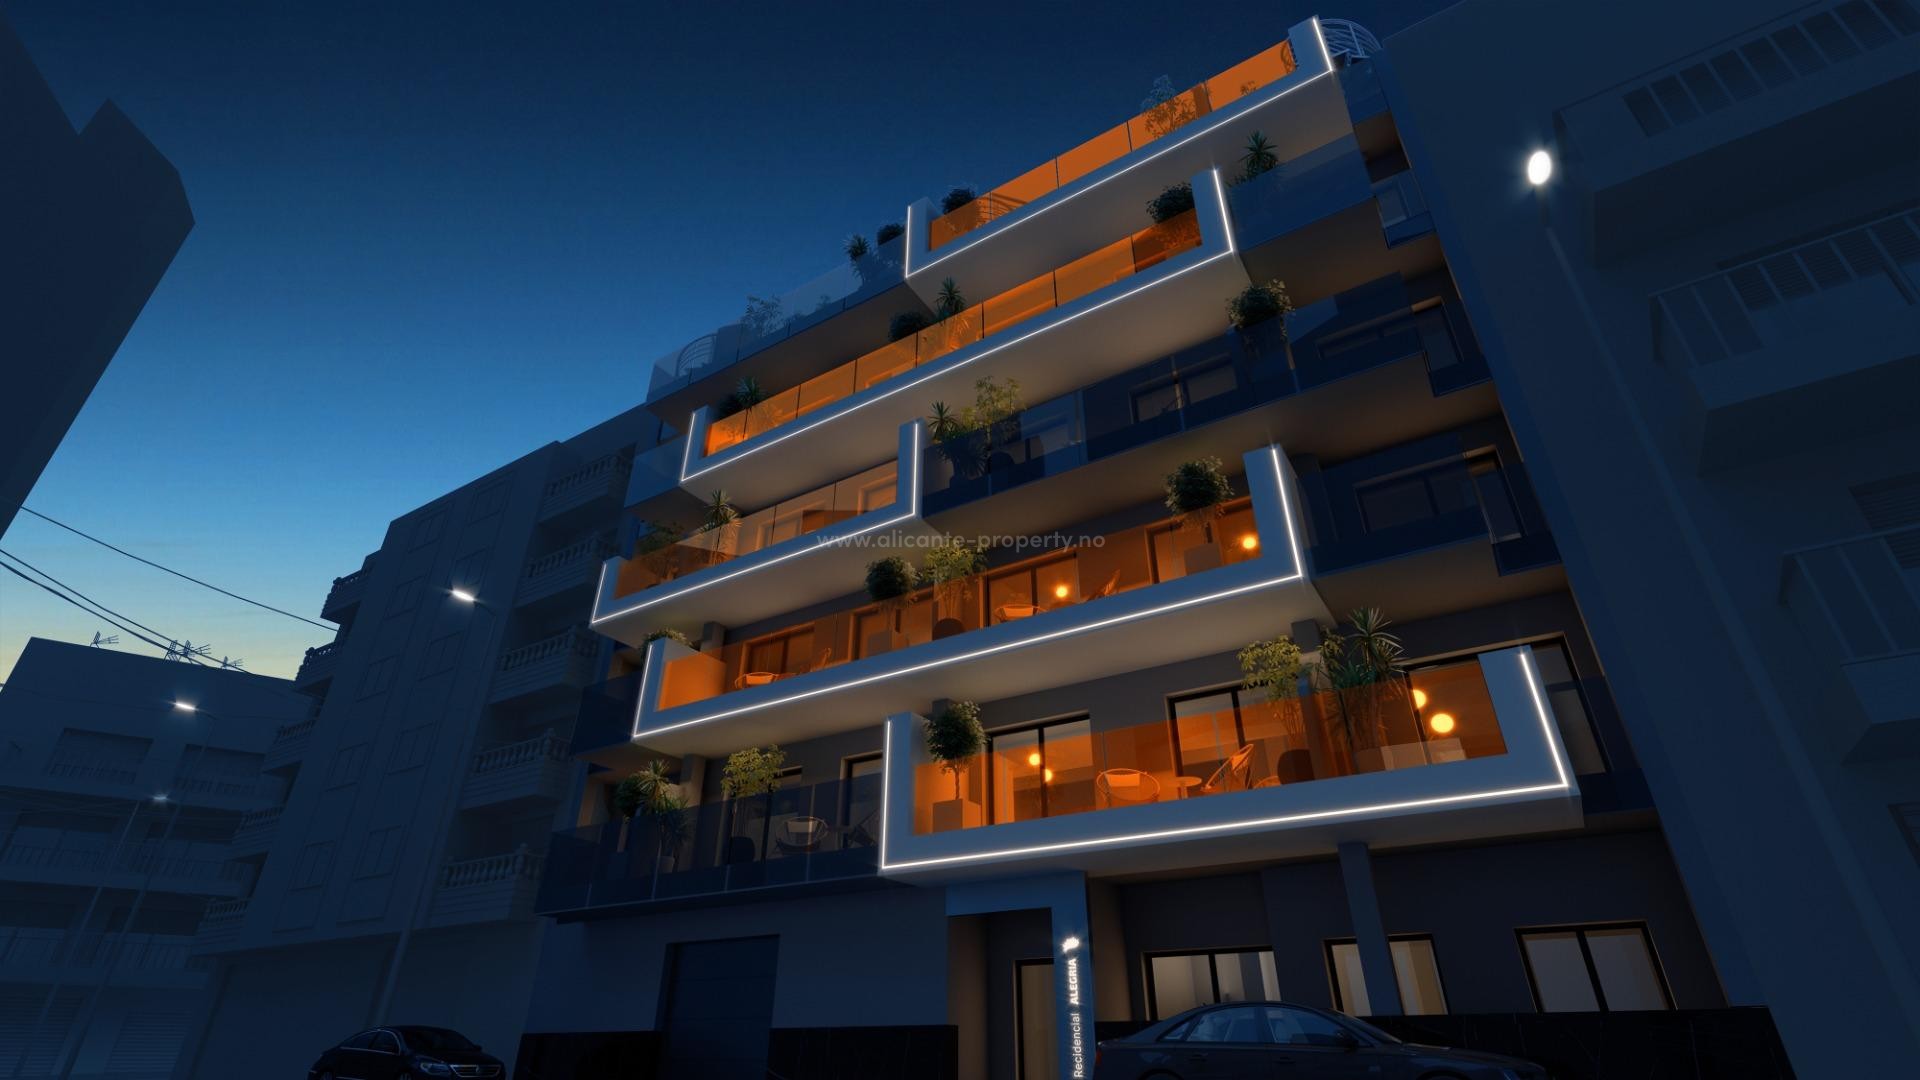 New homes in Torrevieja, 21 apartments/penthouses, 2/3 bedrooms, 2 bathrooms, large terraces, communal swimming pool and sauna, underground parking